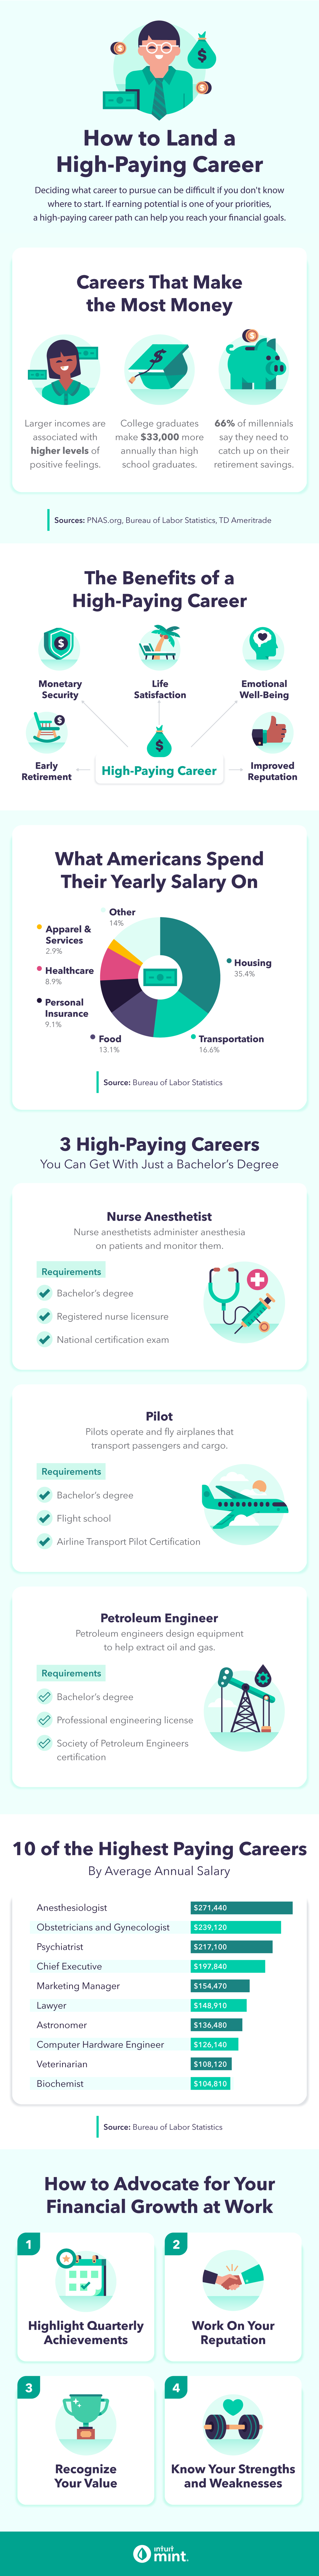 How to Land a High-Paying Career